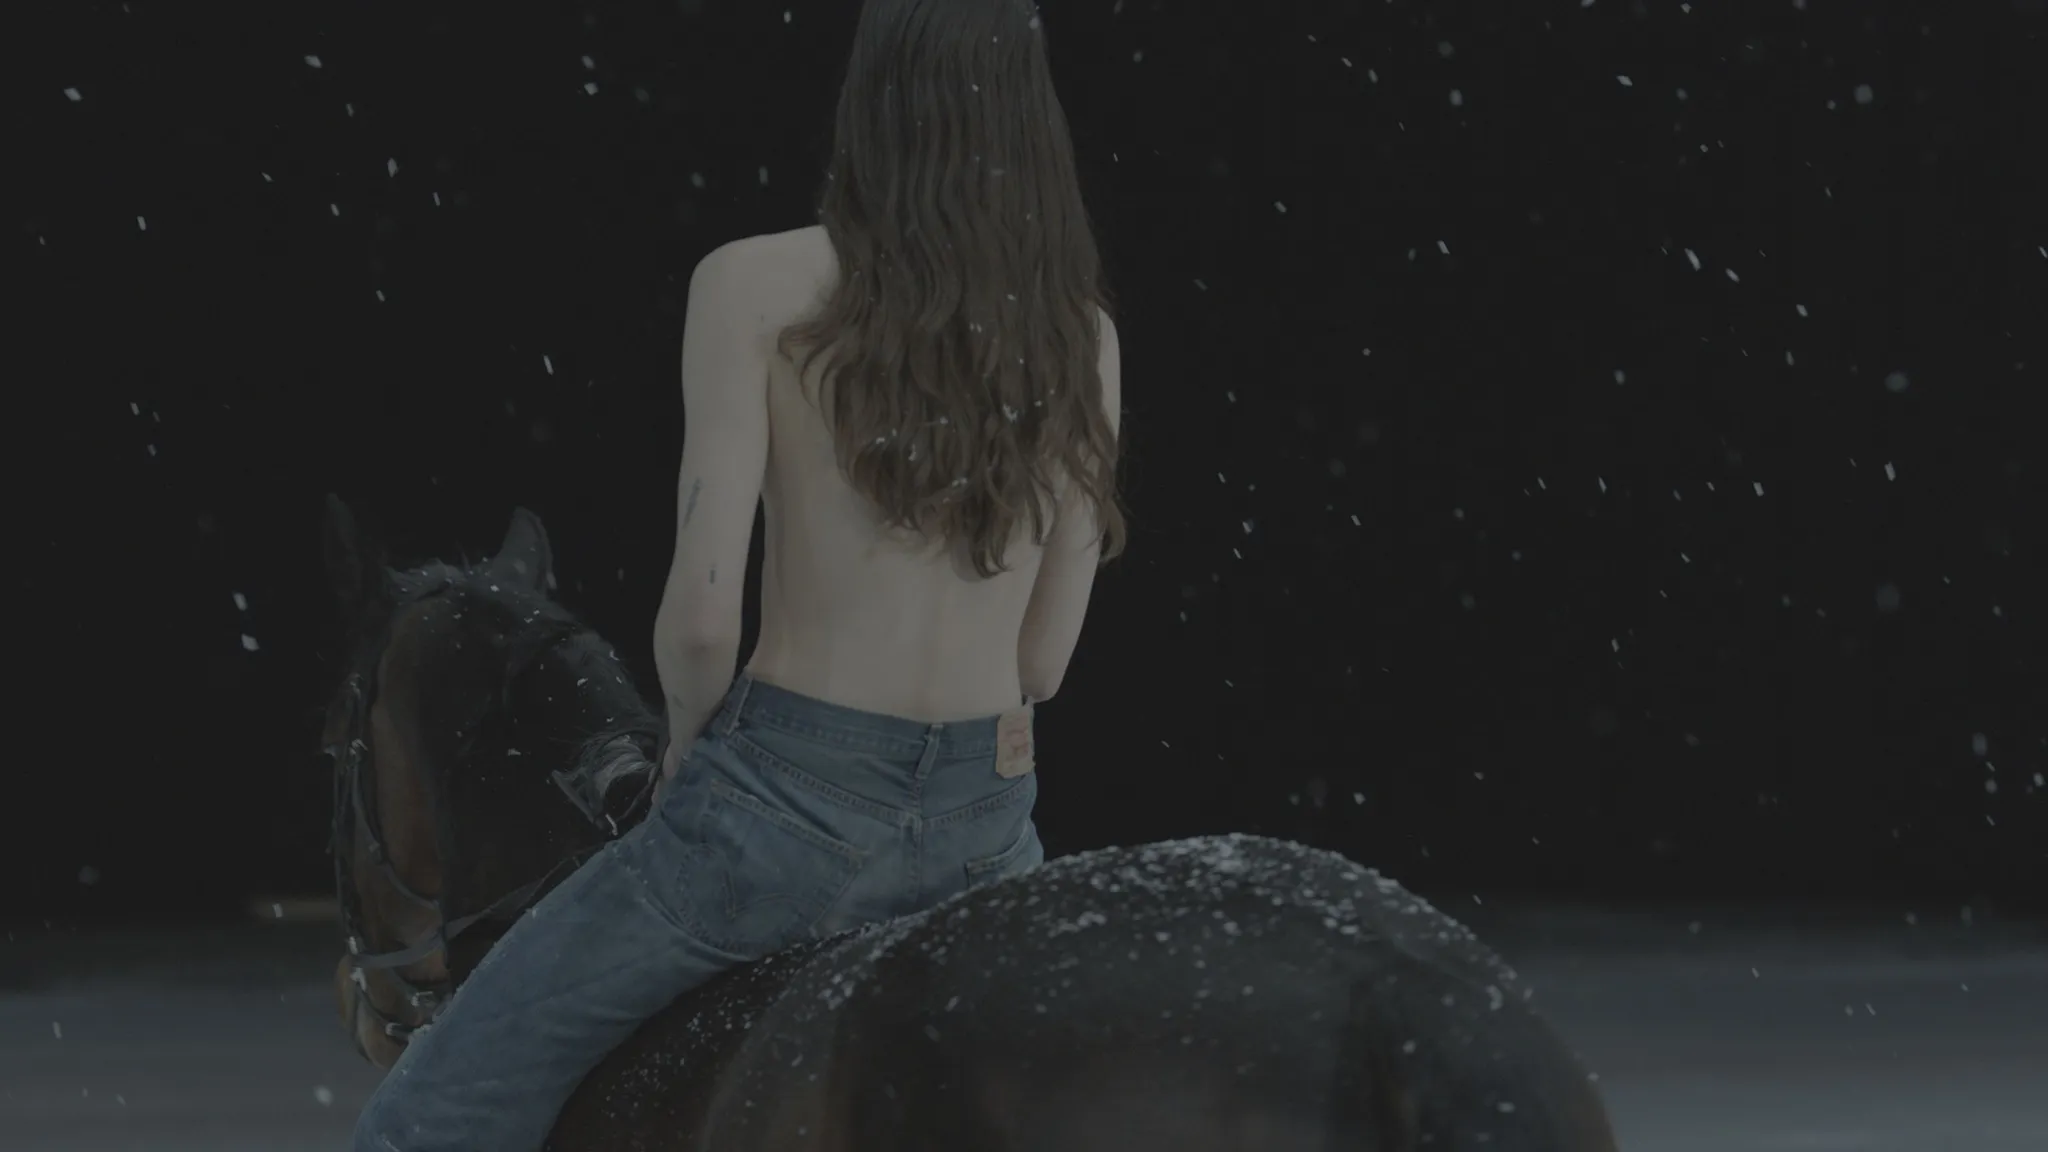 Eliza shirtless on a horse in a snowy landscape, picture taken from behind